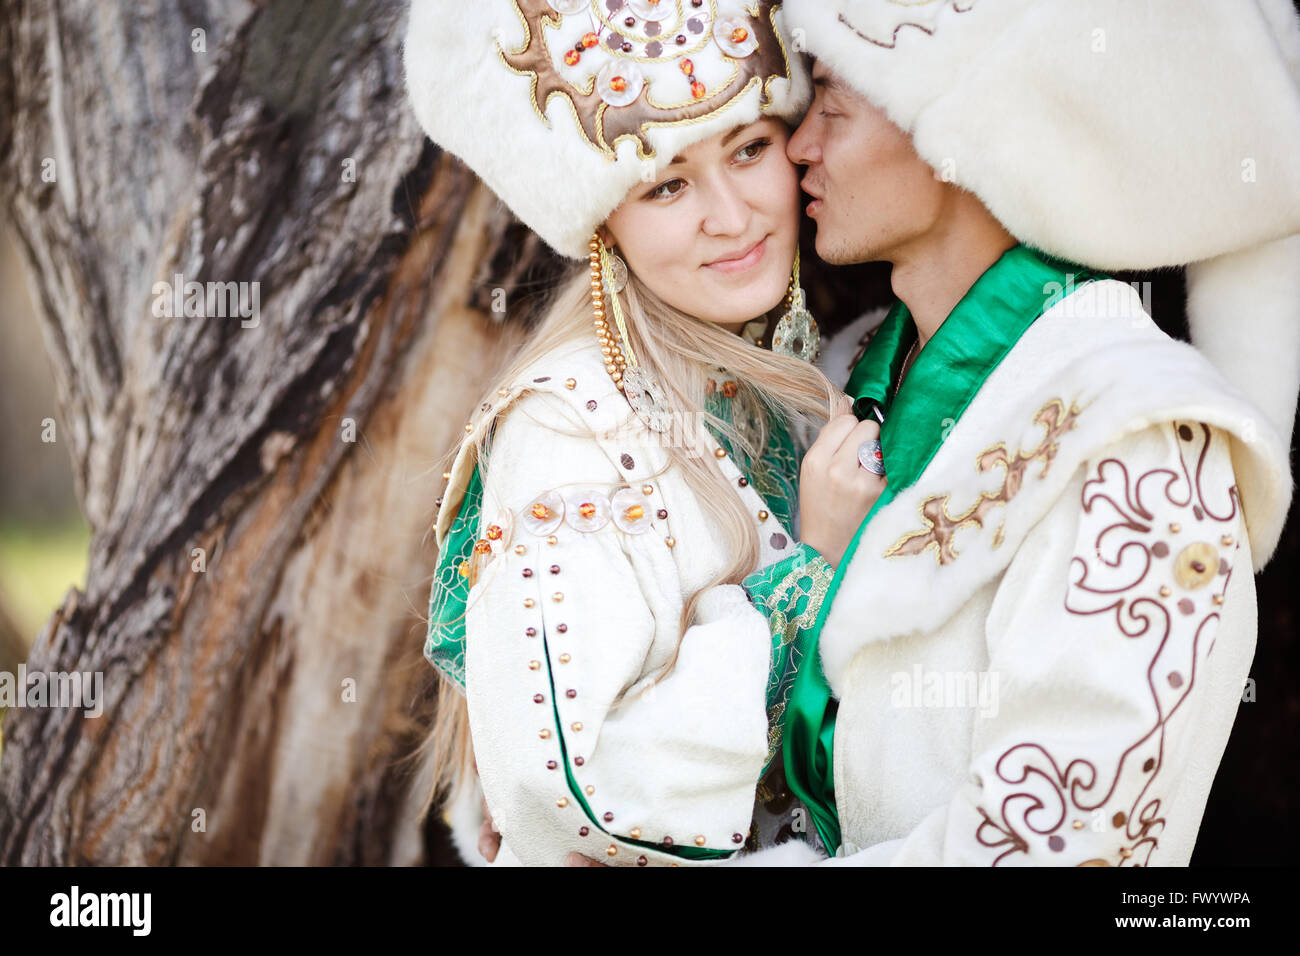 Couple in ethnic costumes embrace on background of textured wood, groom kisses bride at cheek. Stock Photo